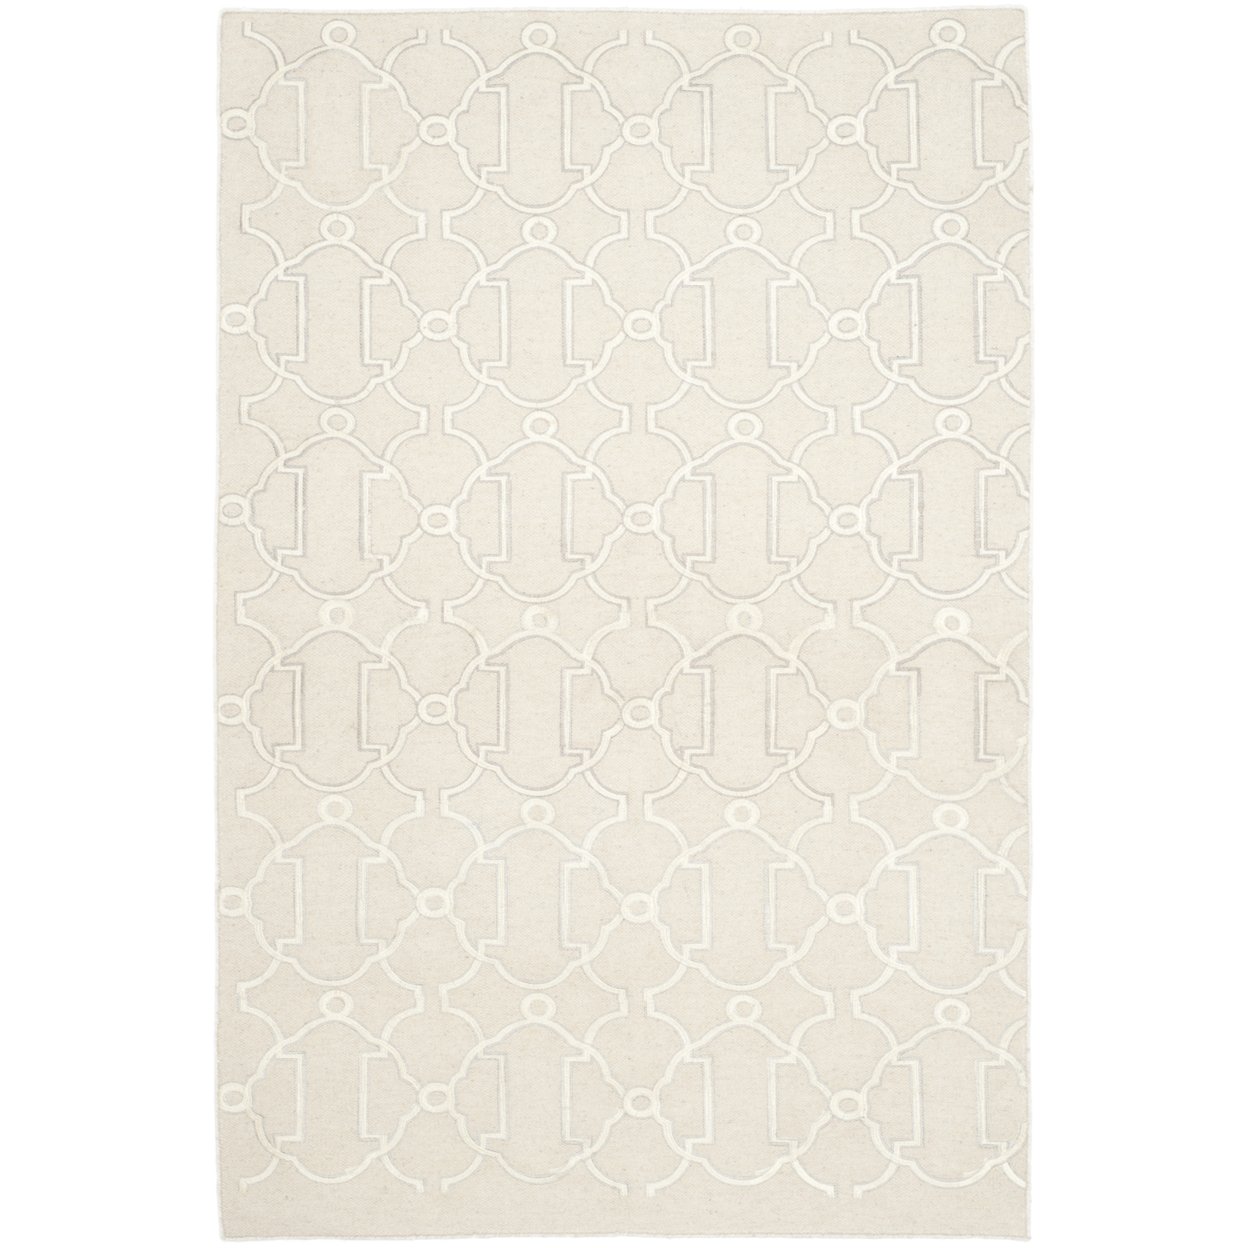 SAFAVIEH Dhurries Collection DHU643A Handwoven Beige Rug - 3' X 5'